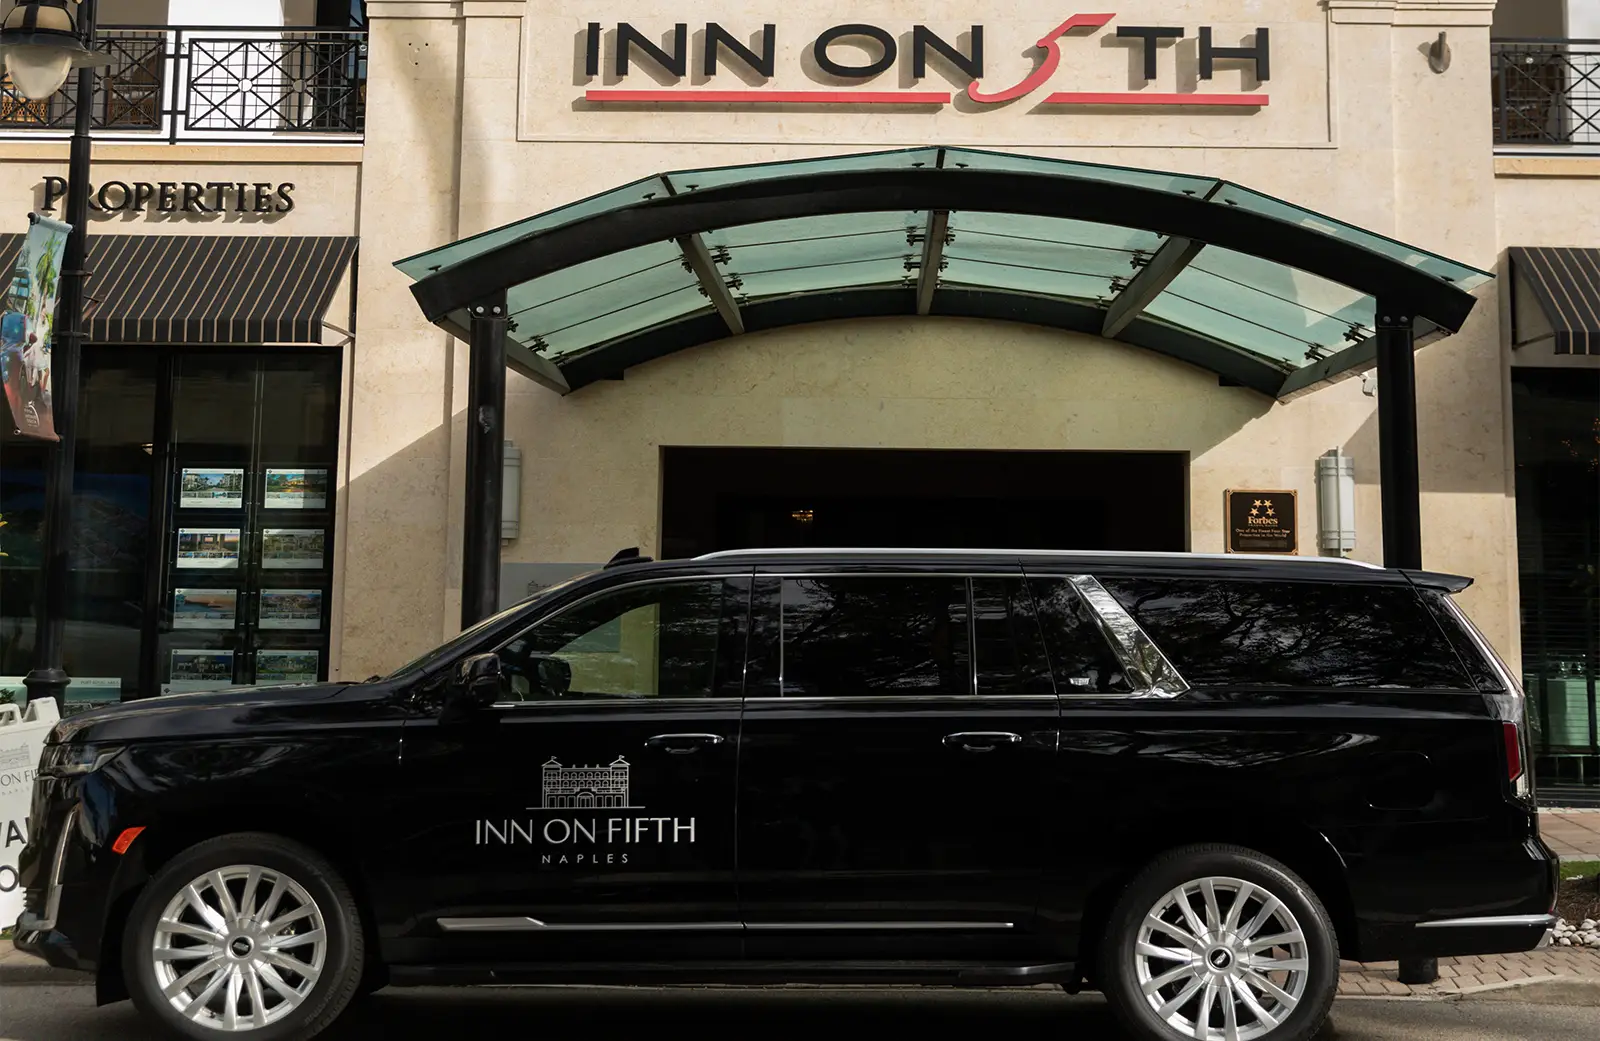 Exterior of hotels with Inn on Fifth SUV